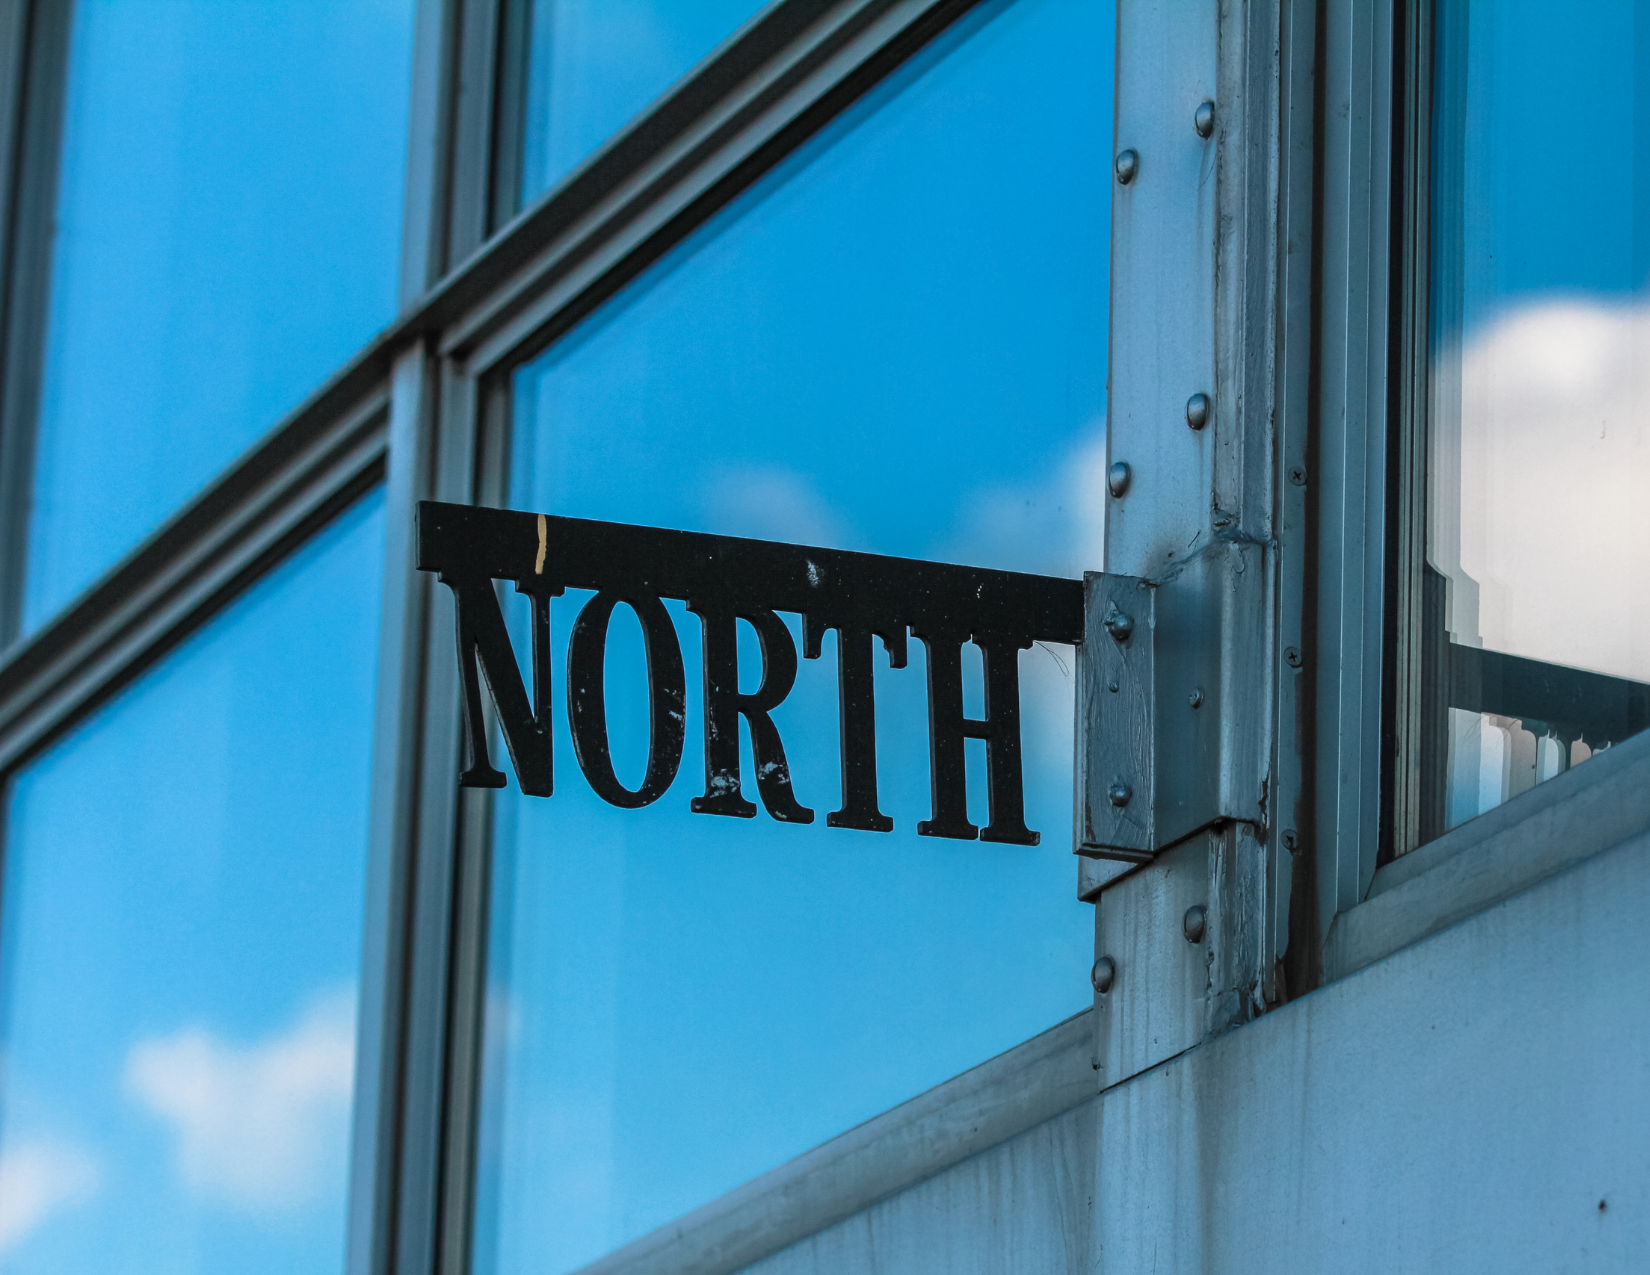 A picture of a sign that says "North"